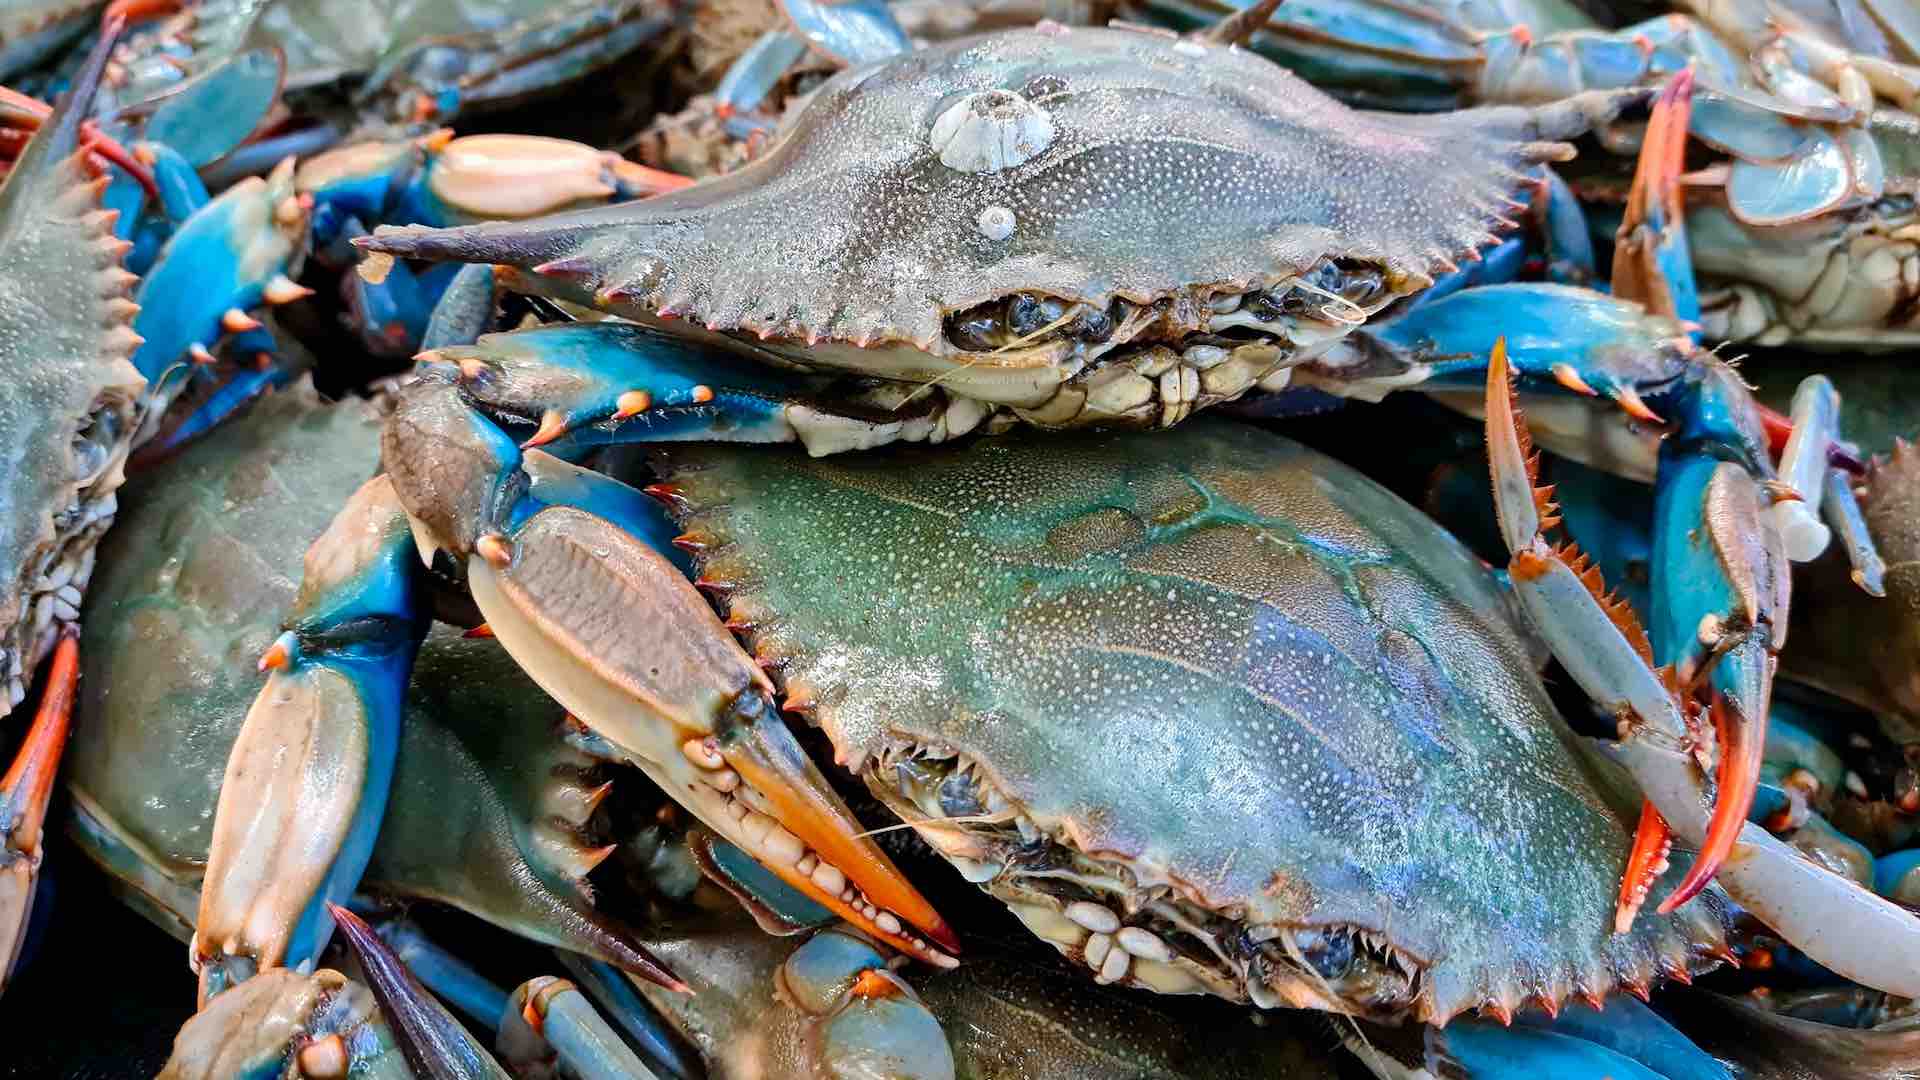 Italy pledges millions in defiant stand against blue crab invasion